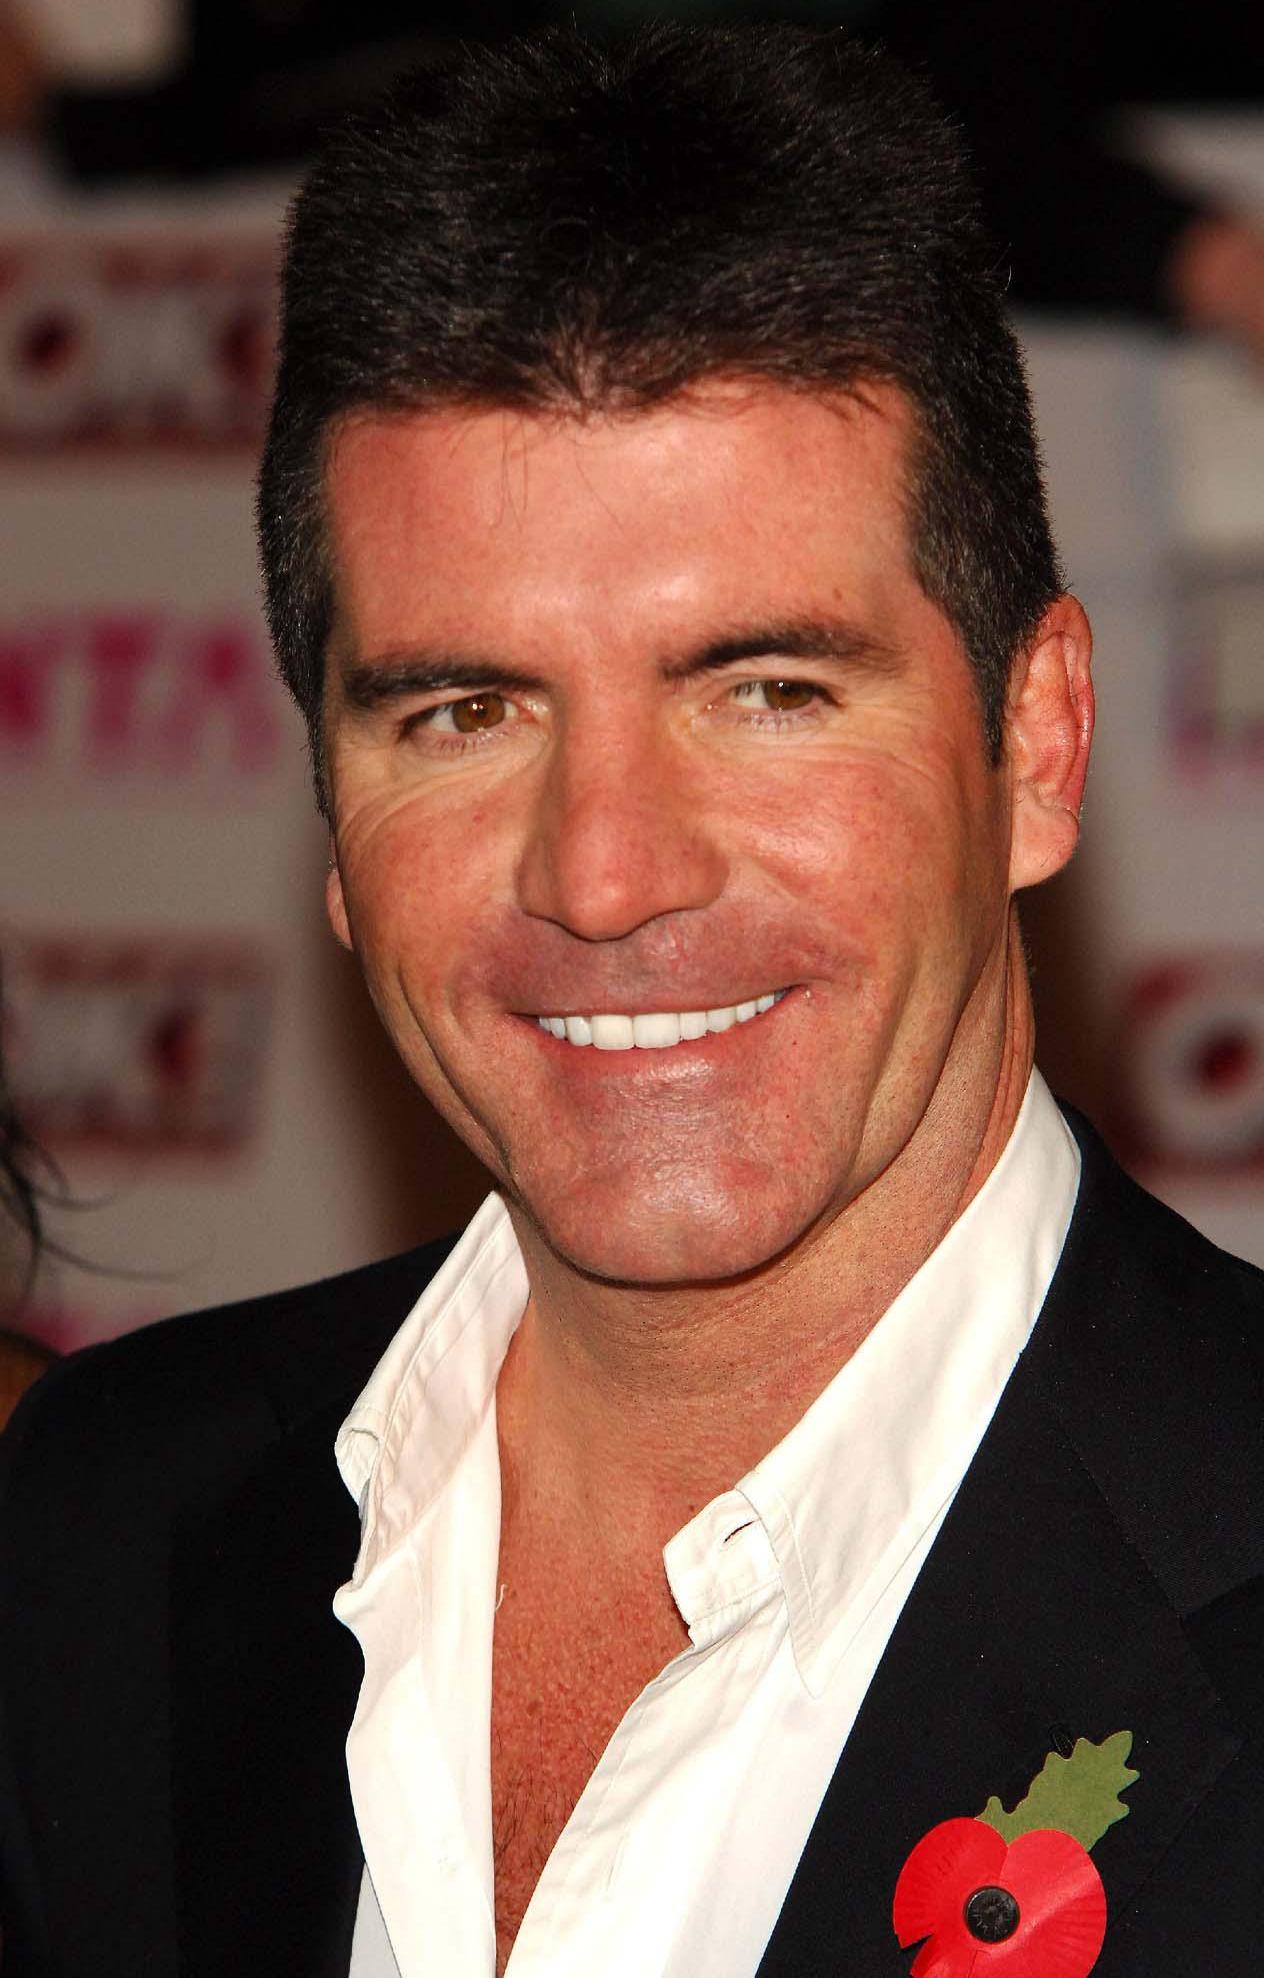 Simon Cowell Expected To Judge Indian Version Of The X Factor